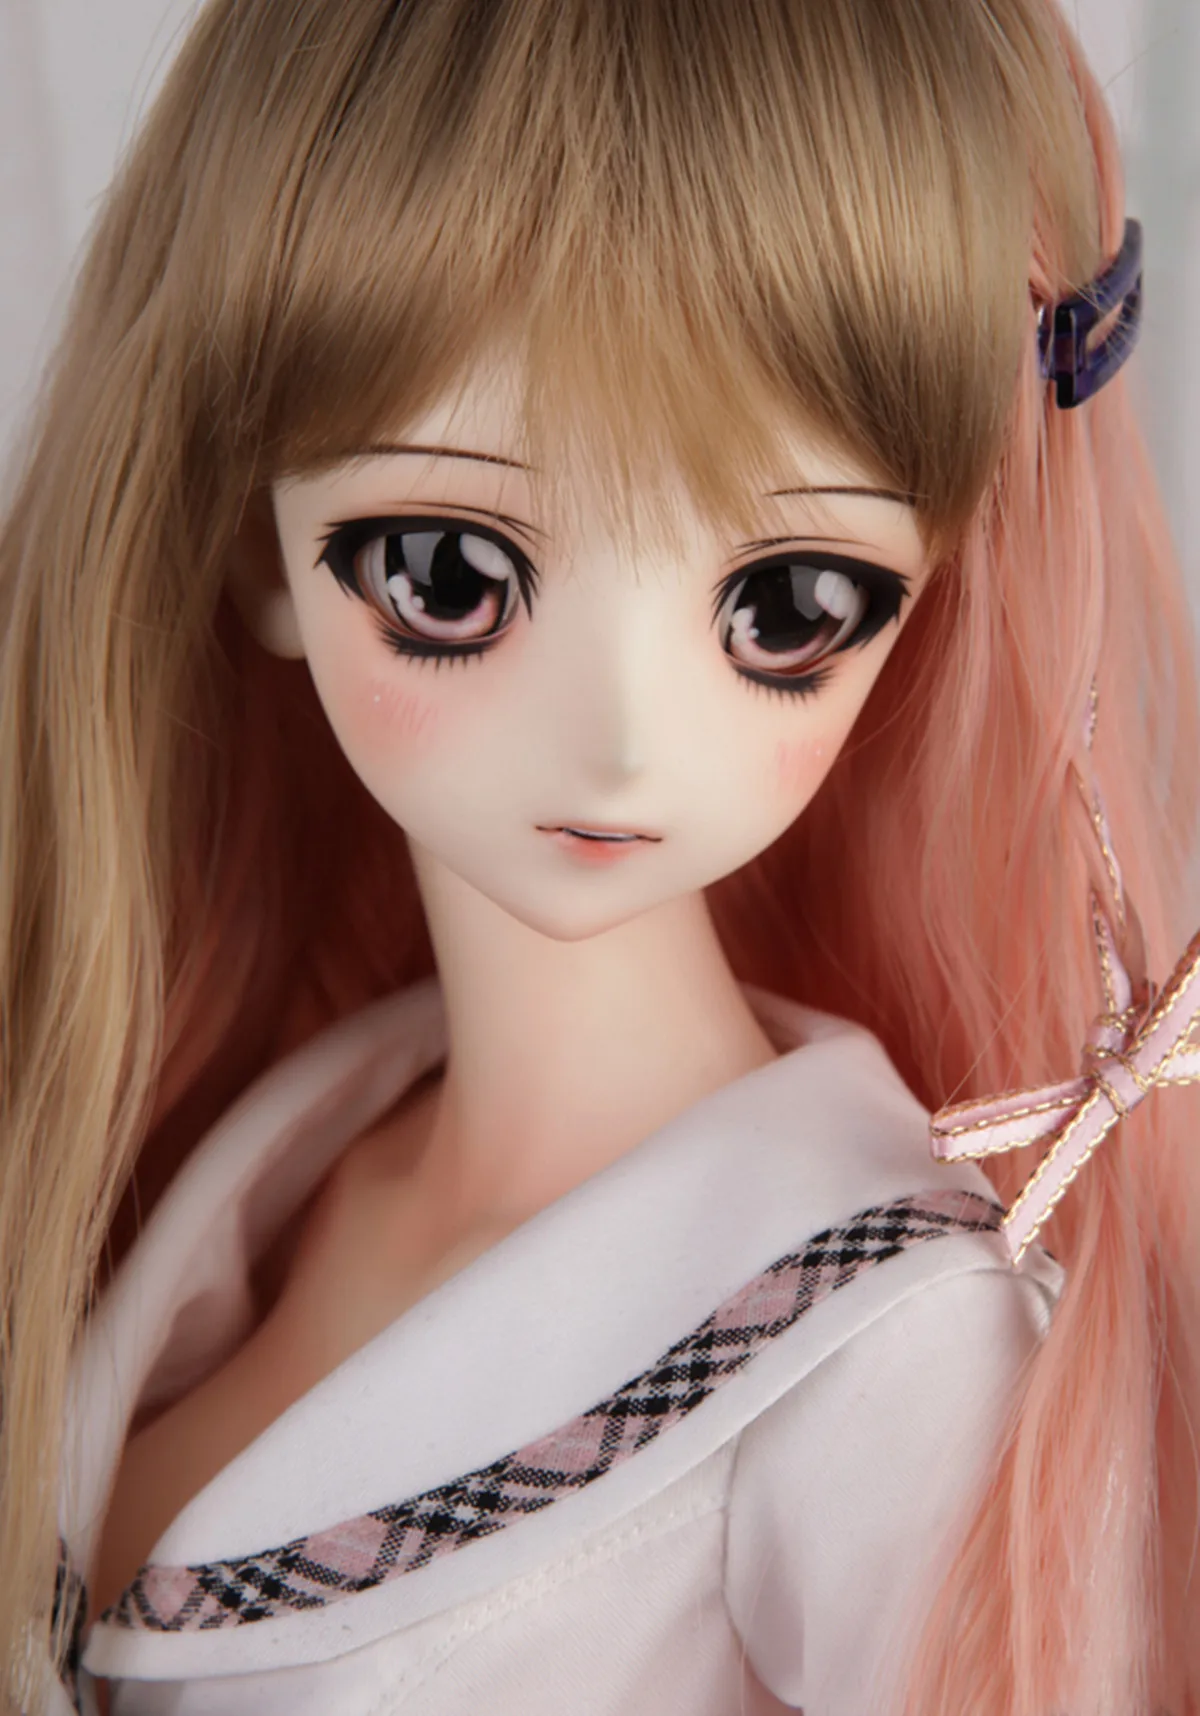 

New 60cm hahaBJD 1/3 scale girl AMY highly attractive body popular bjd remain dogs free eyes spot makeup